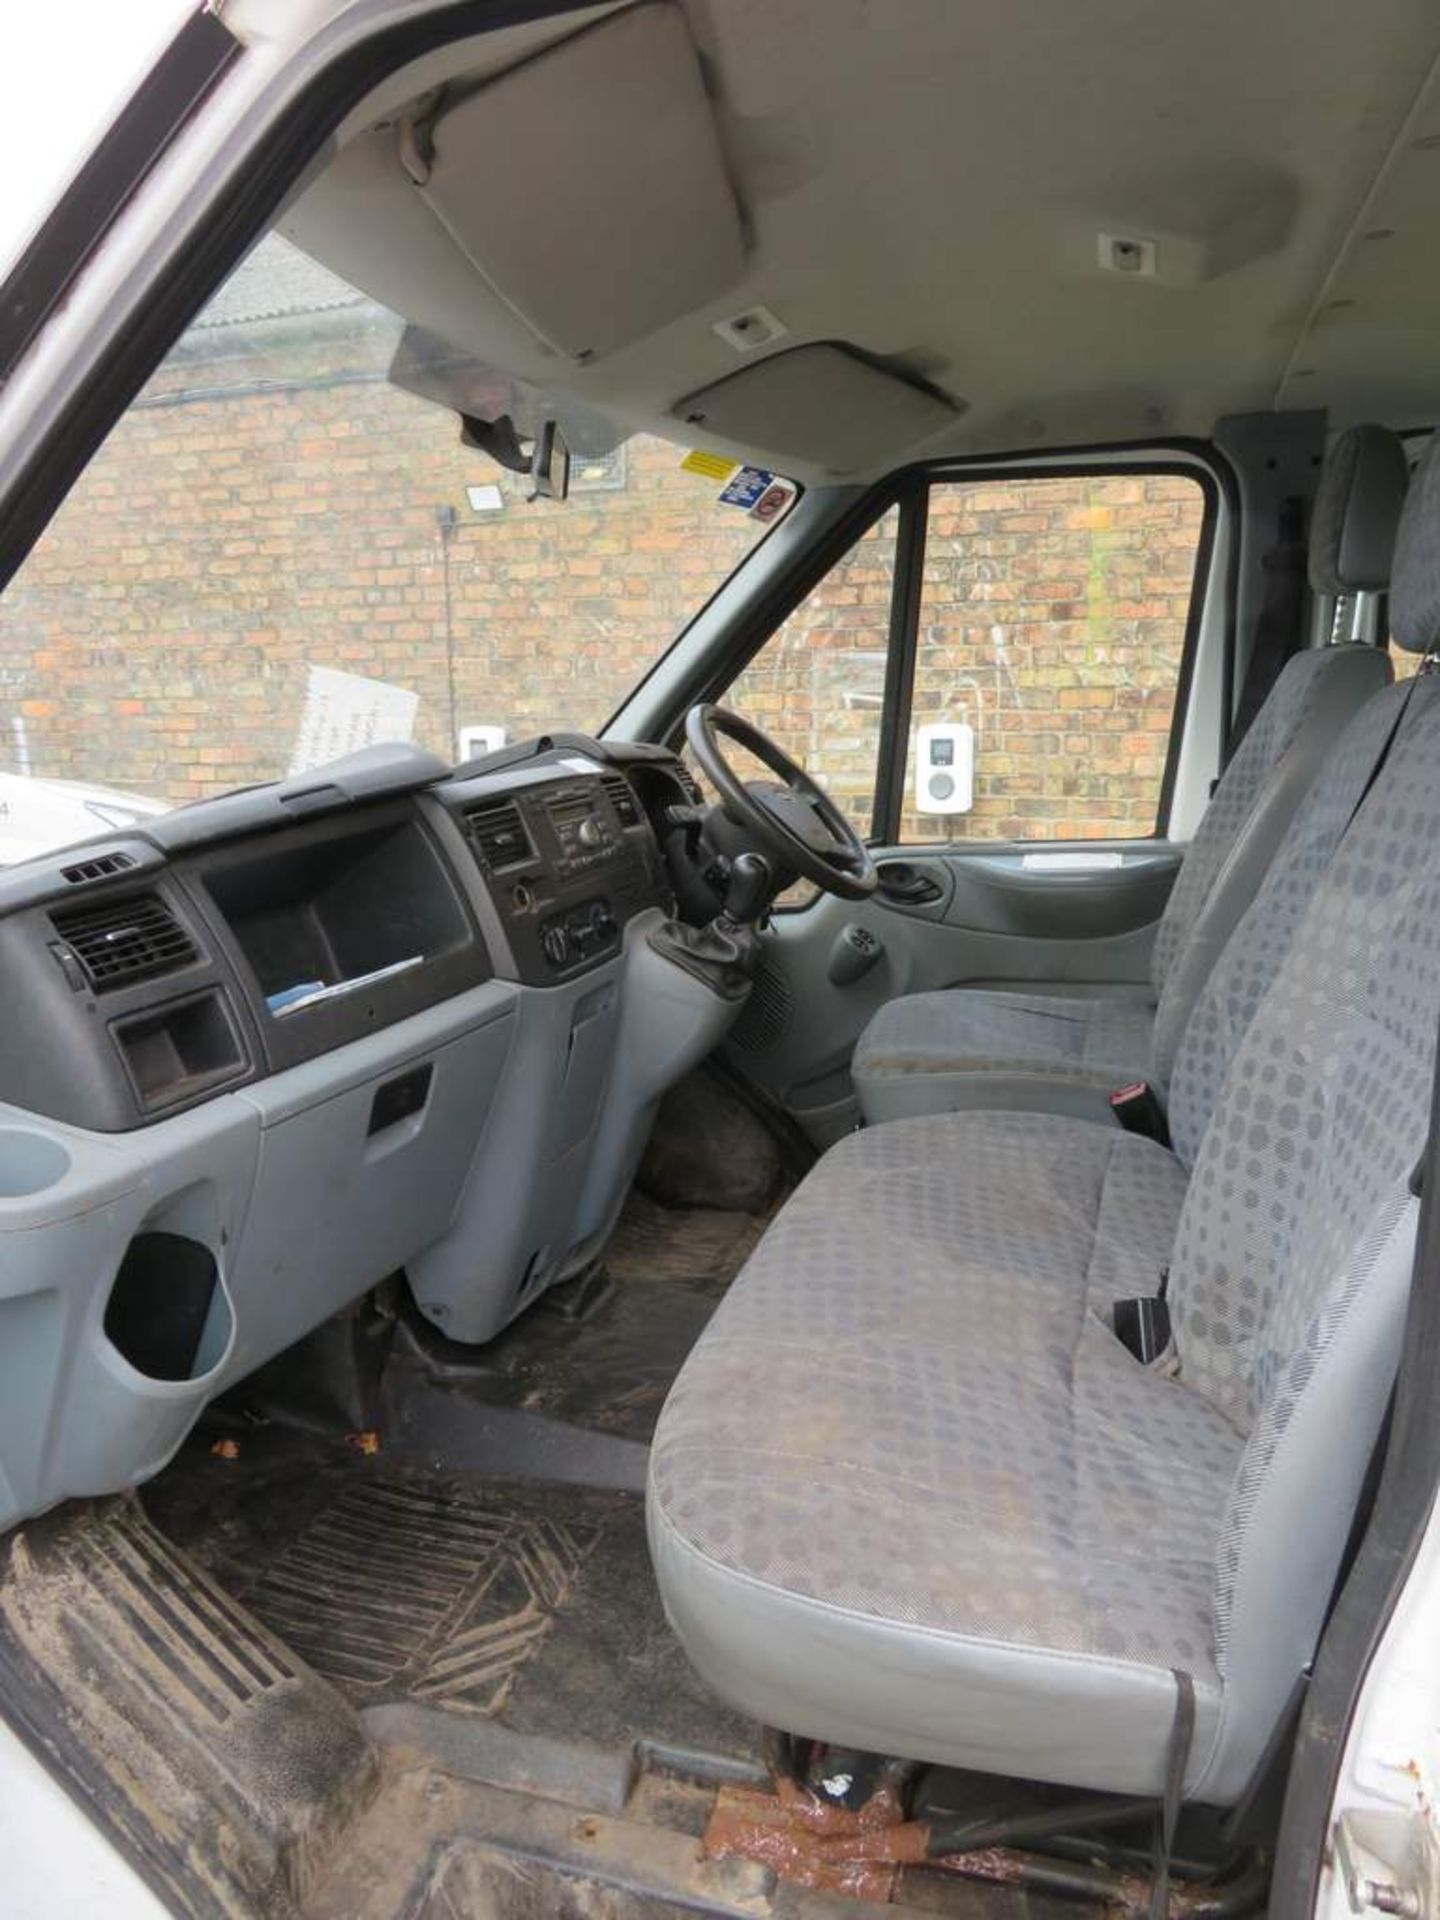 2009 Ford Transit T350L Double Cab Tipper - FX09 YDP - Image 9 of 23